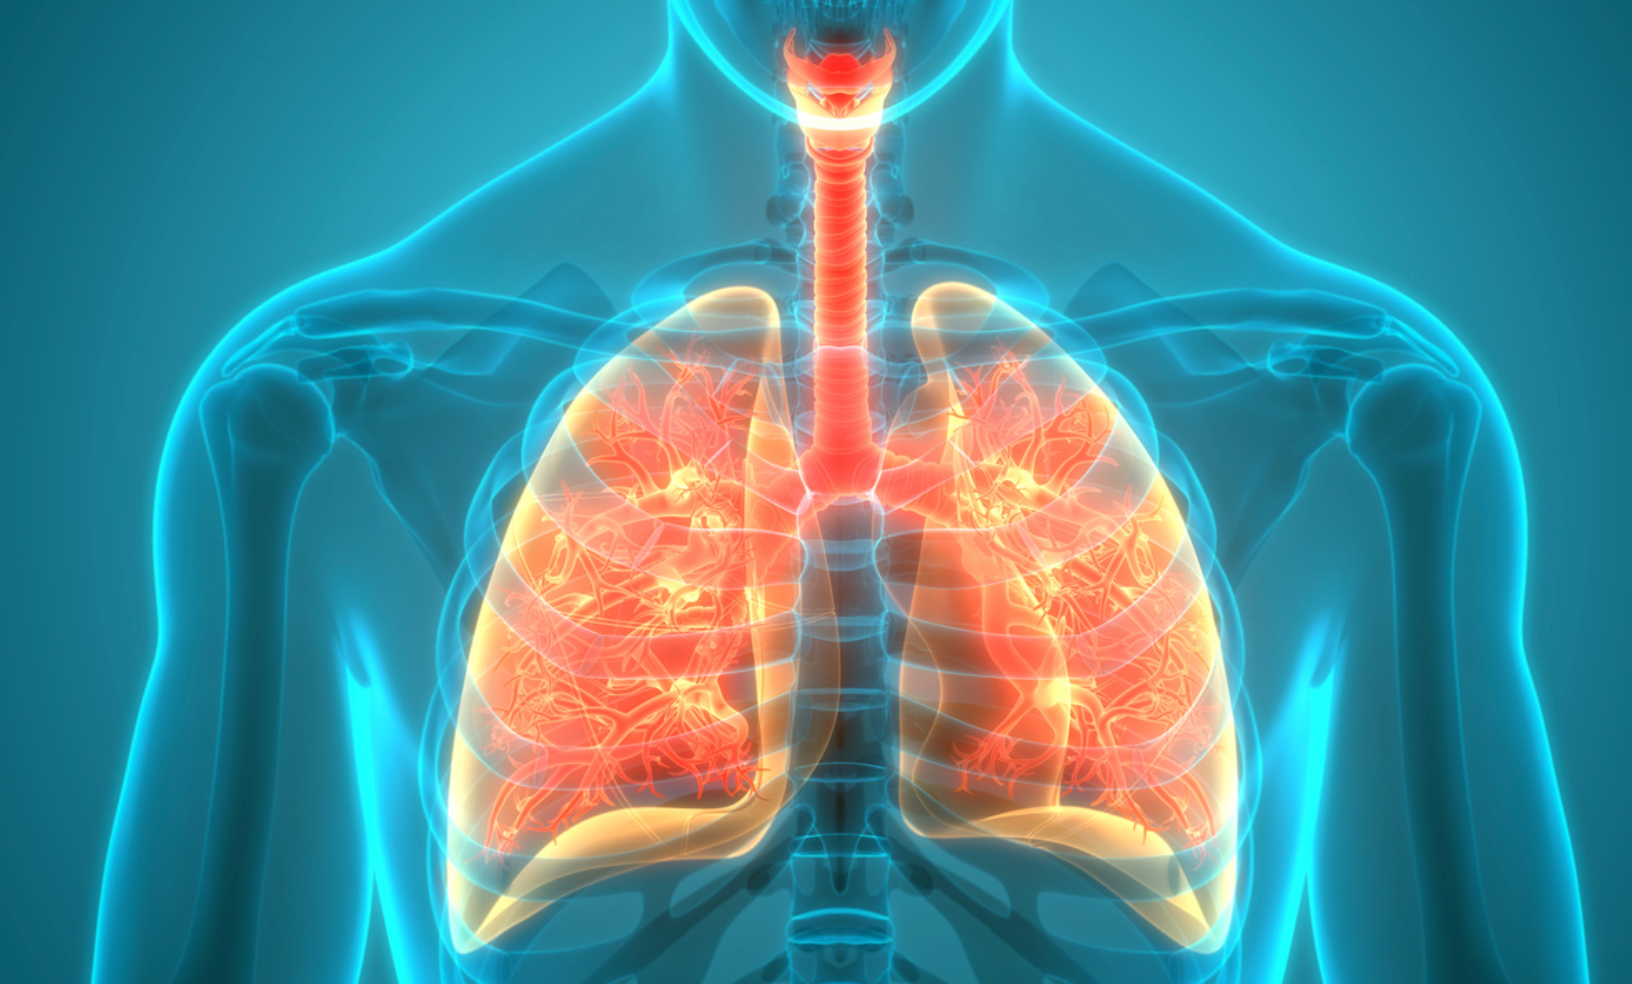 Subcutaneous Immunotherapy-Induced Antibodies May be Effective Treating Allergic Asthma